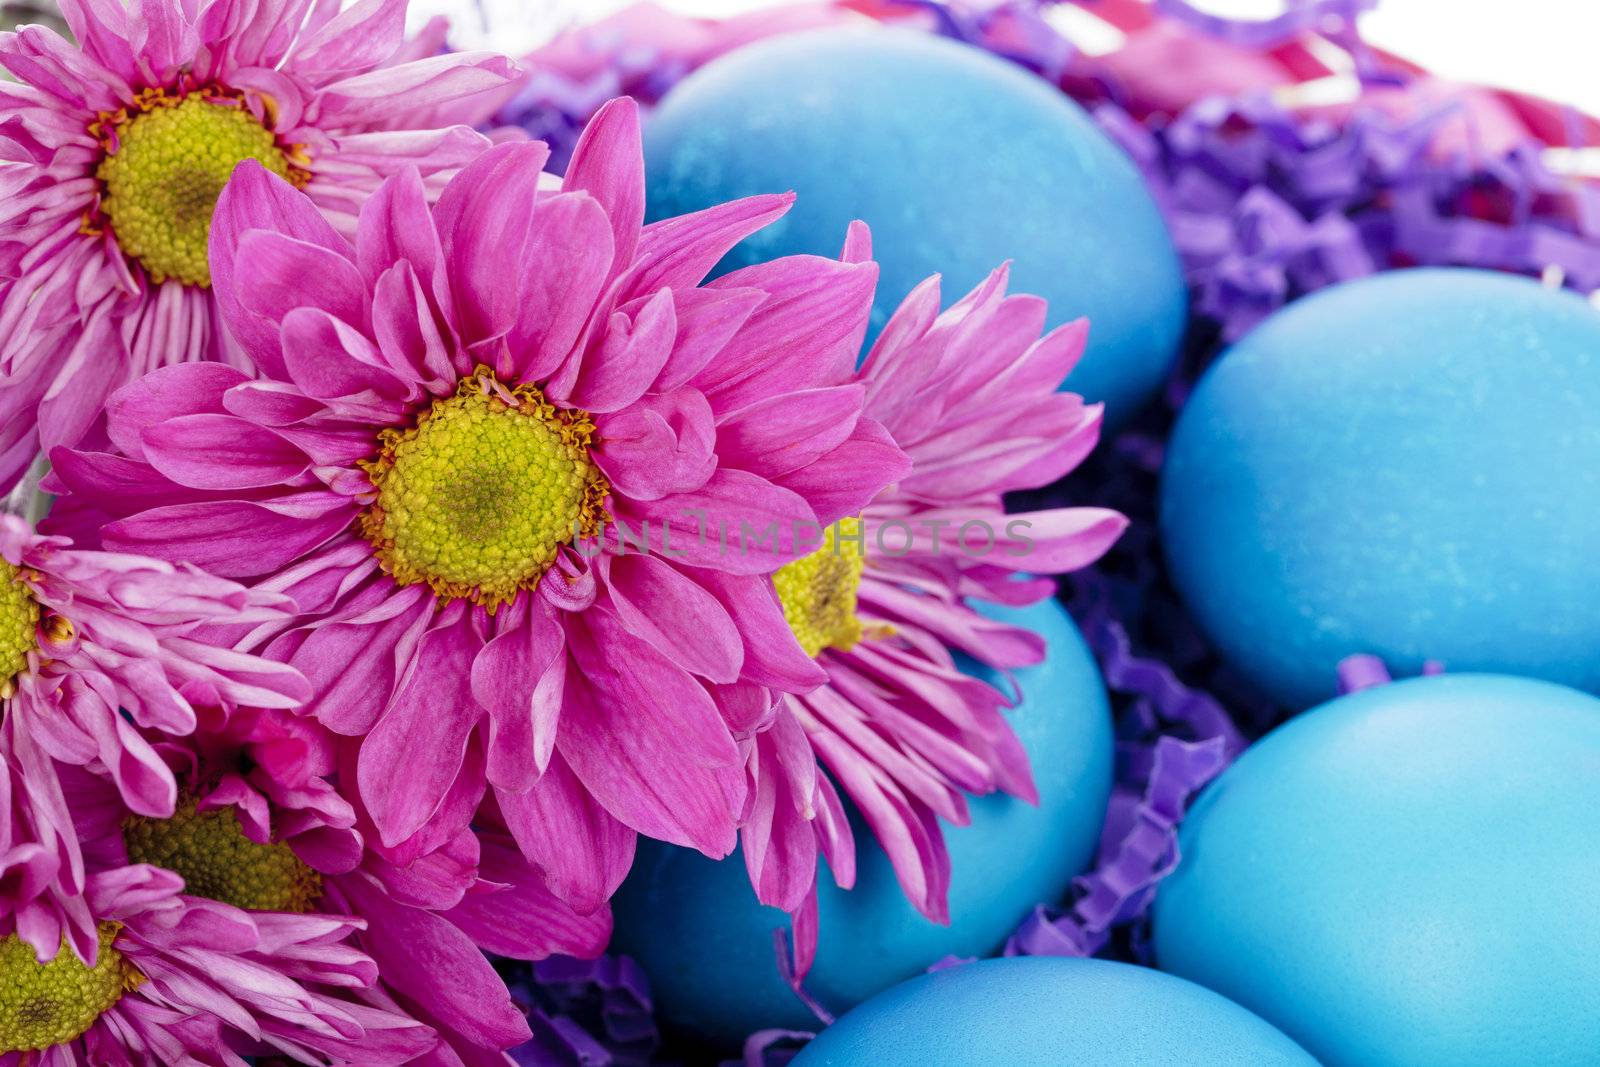 Close-up cropped image of flowers and blue easter eggs in easter basket.